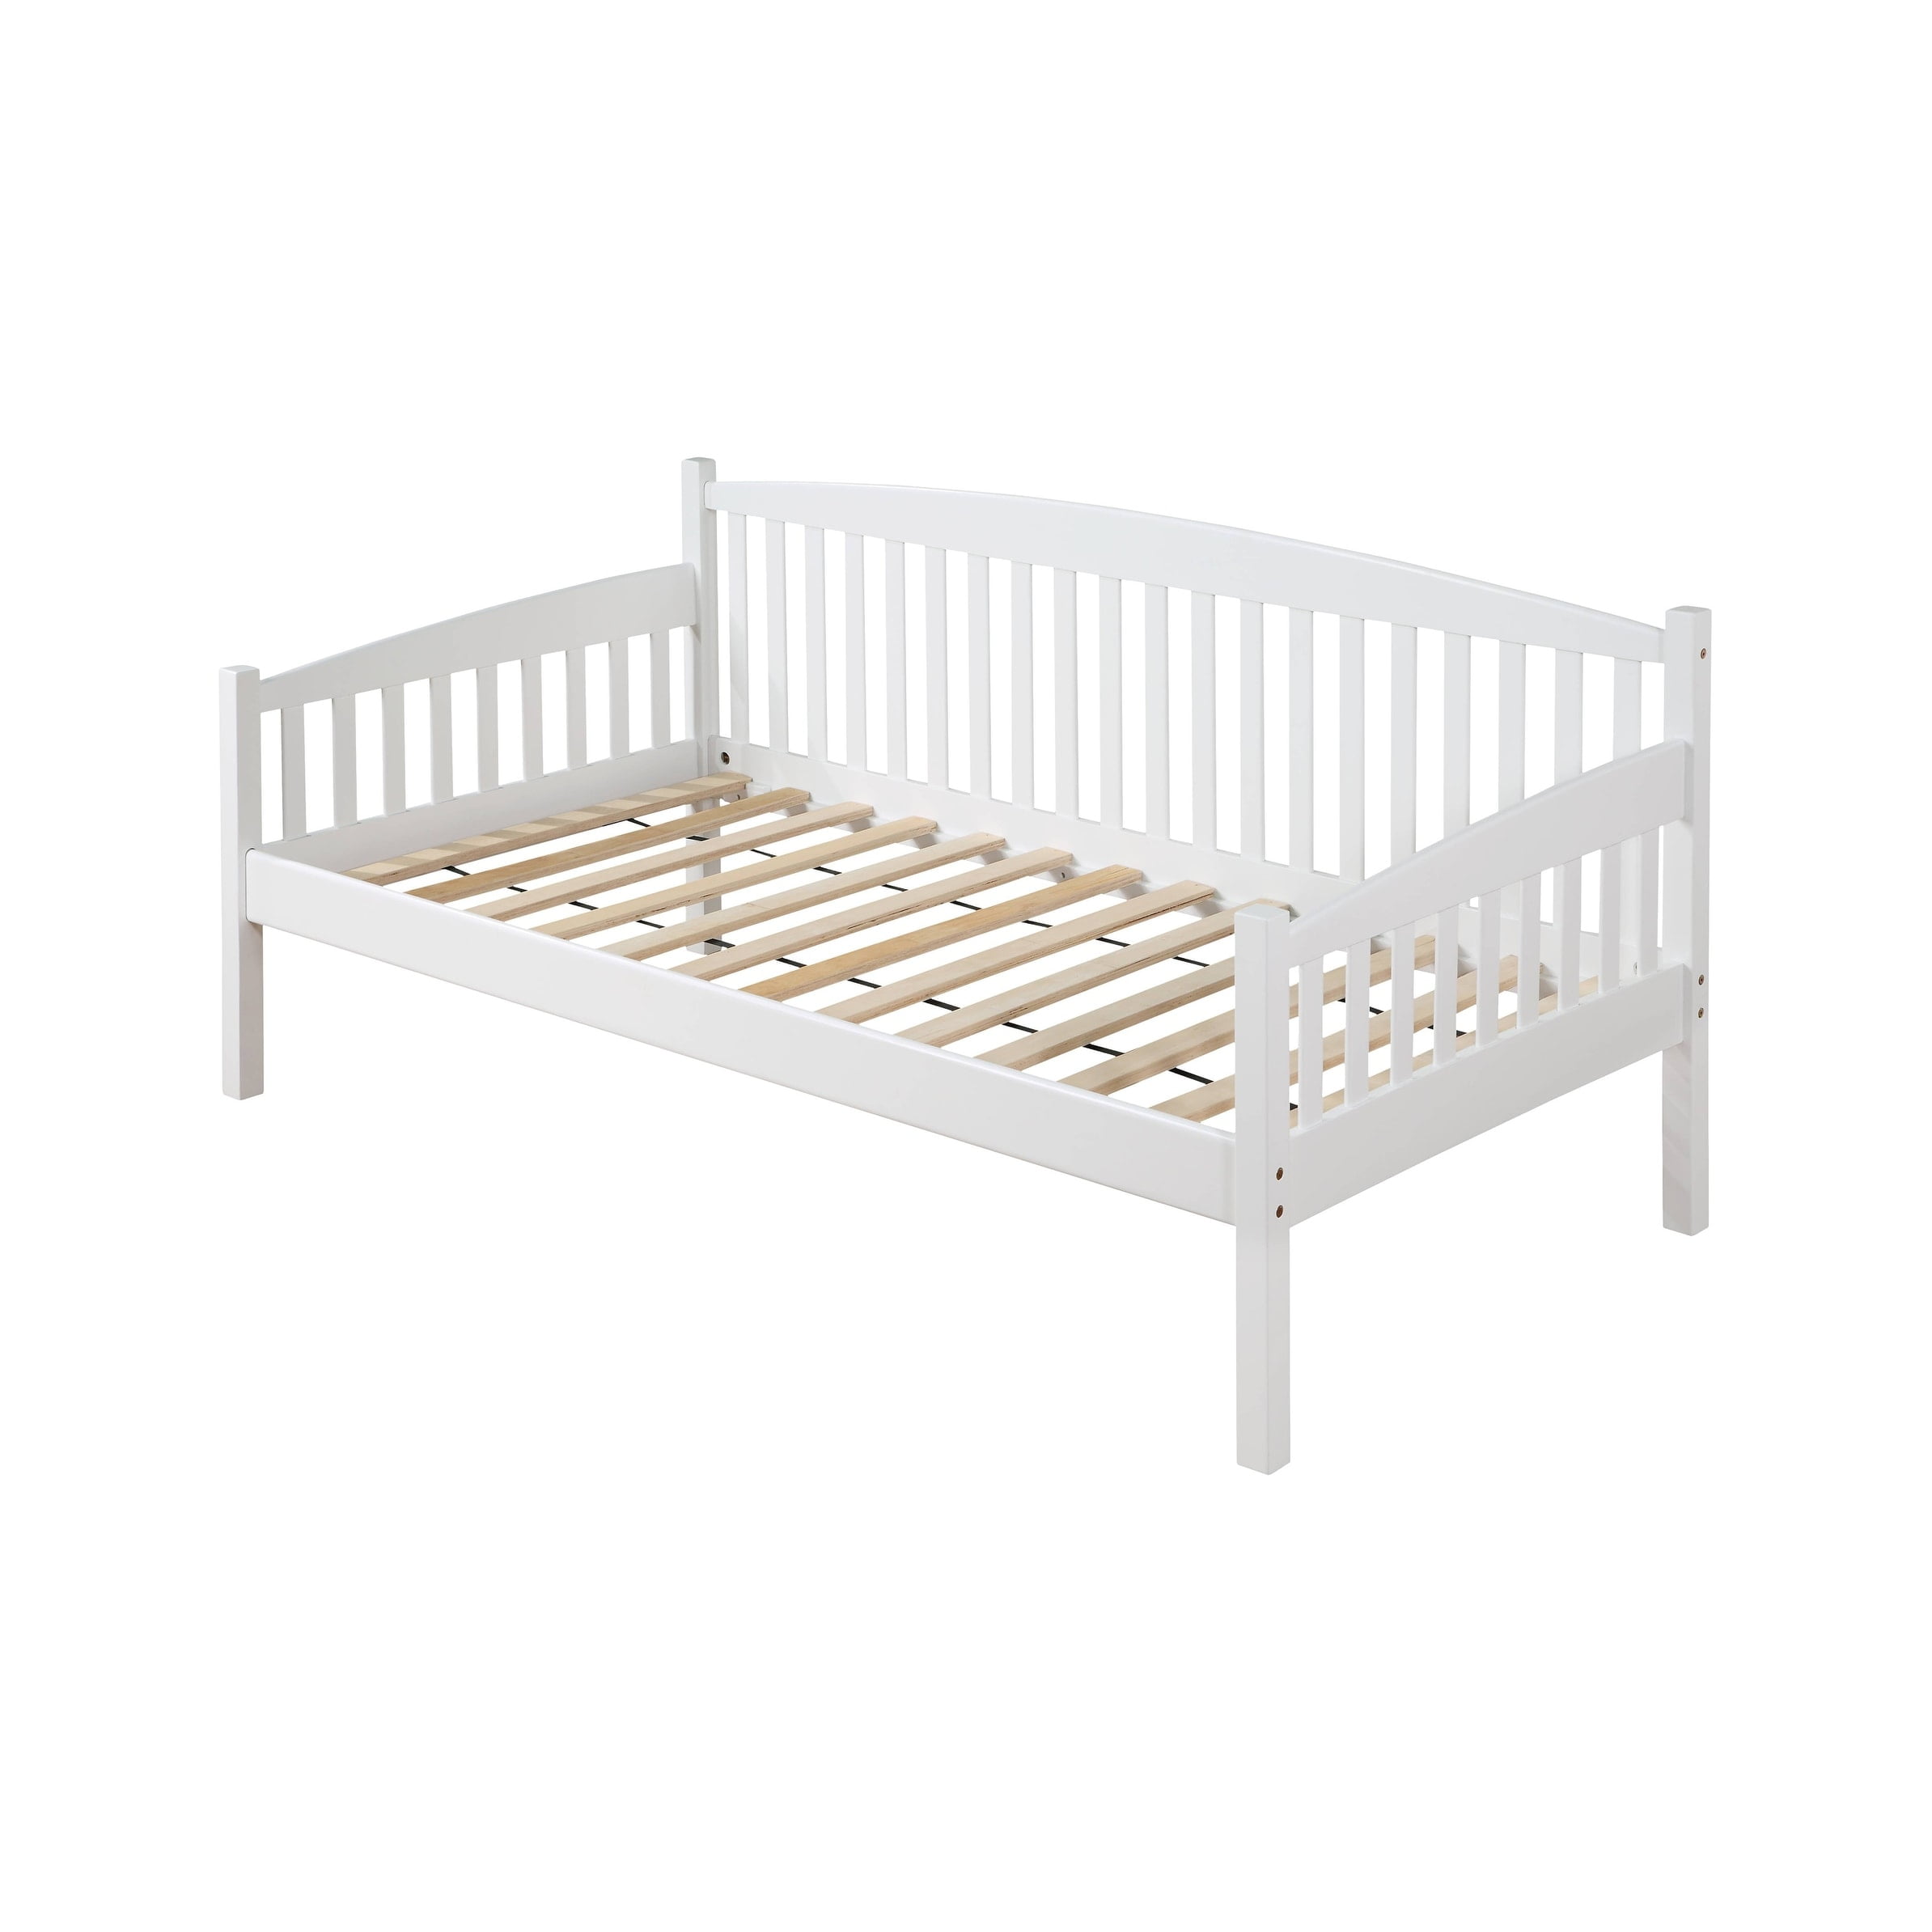 Picture of Acme Furniture BD00379 80 x 42 x 37 in. Caryn Daybed, White - Twin Size